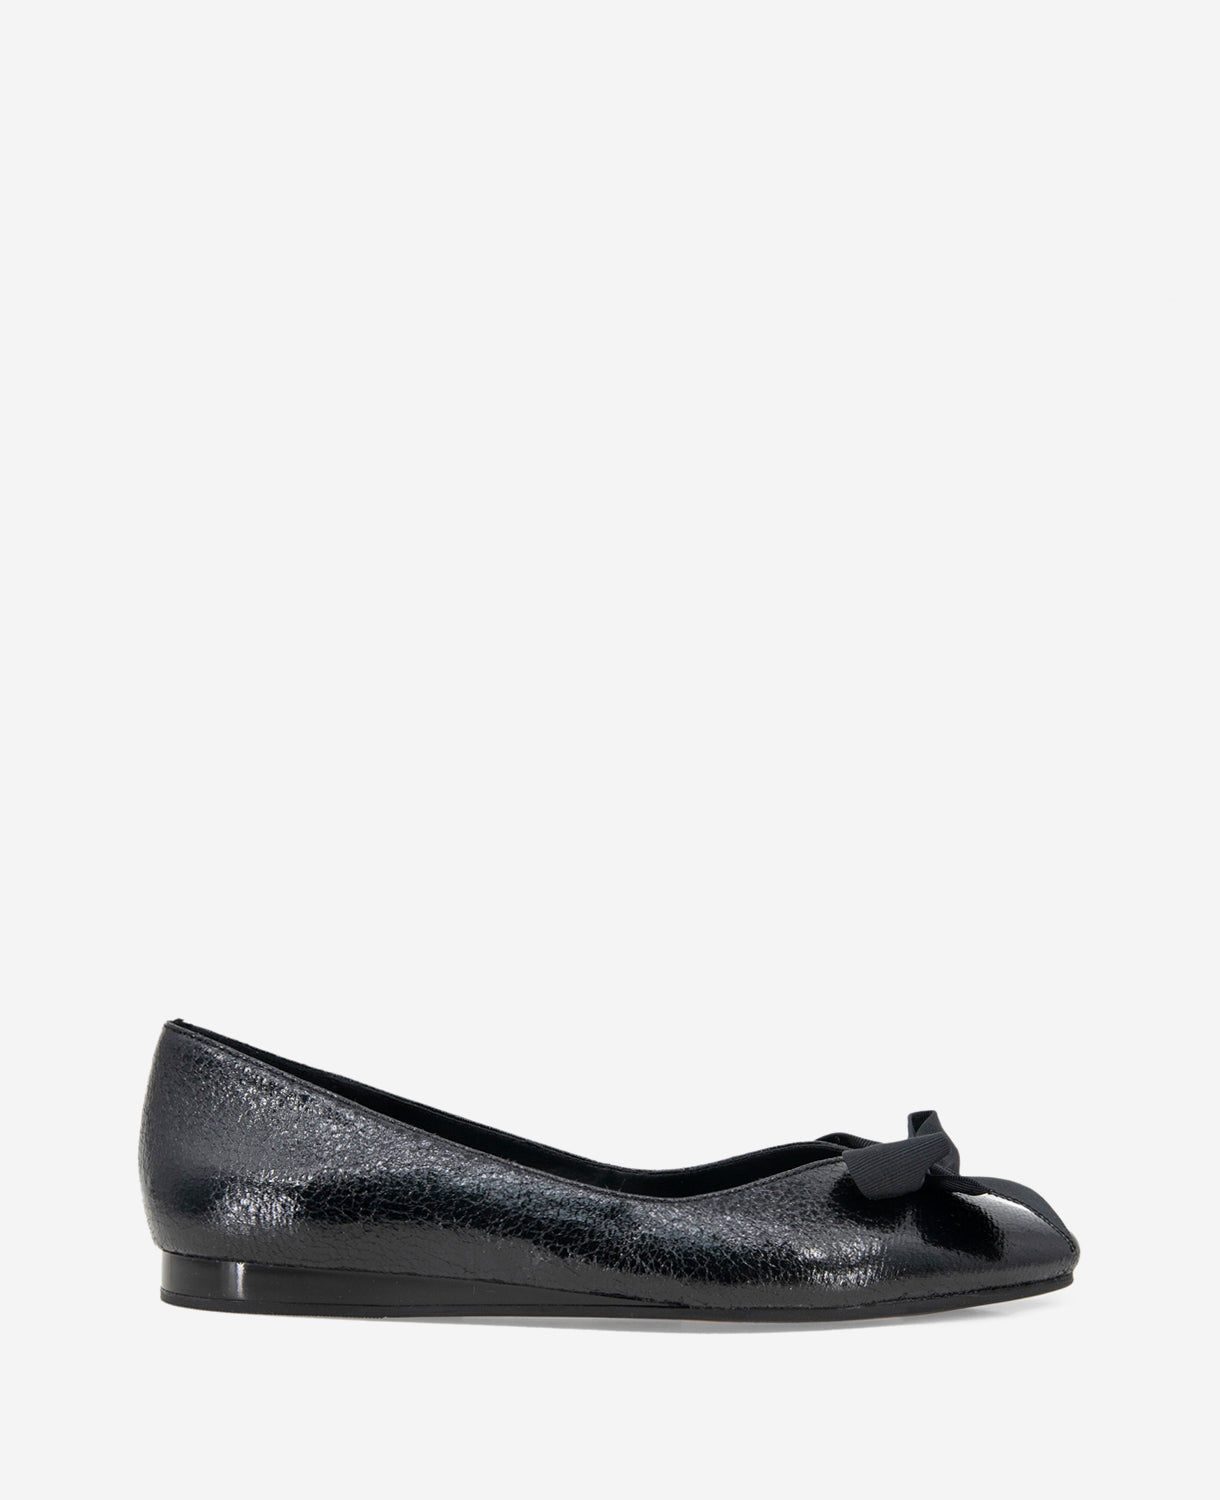 REACTION KENNETH COLE LILY BOW FLAT